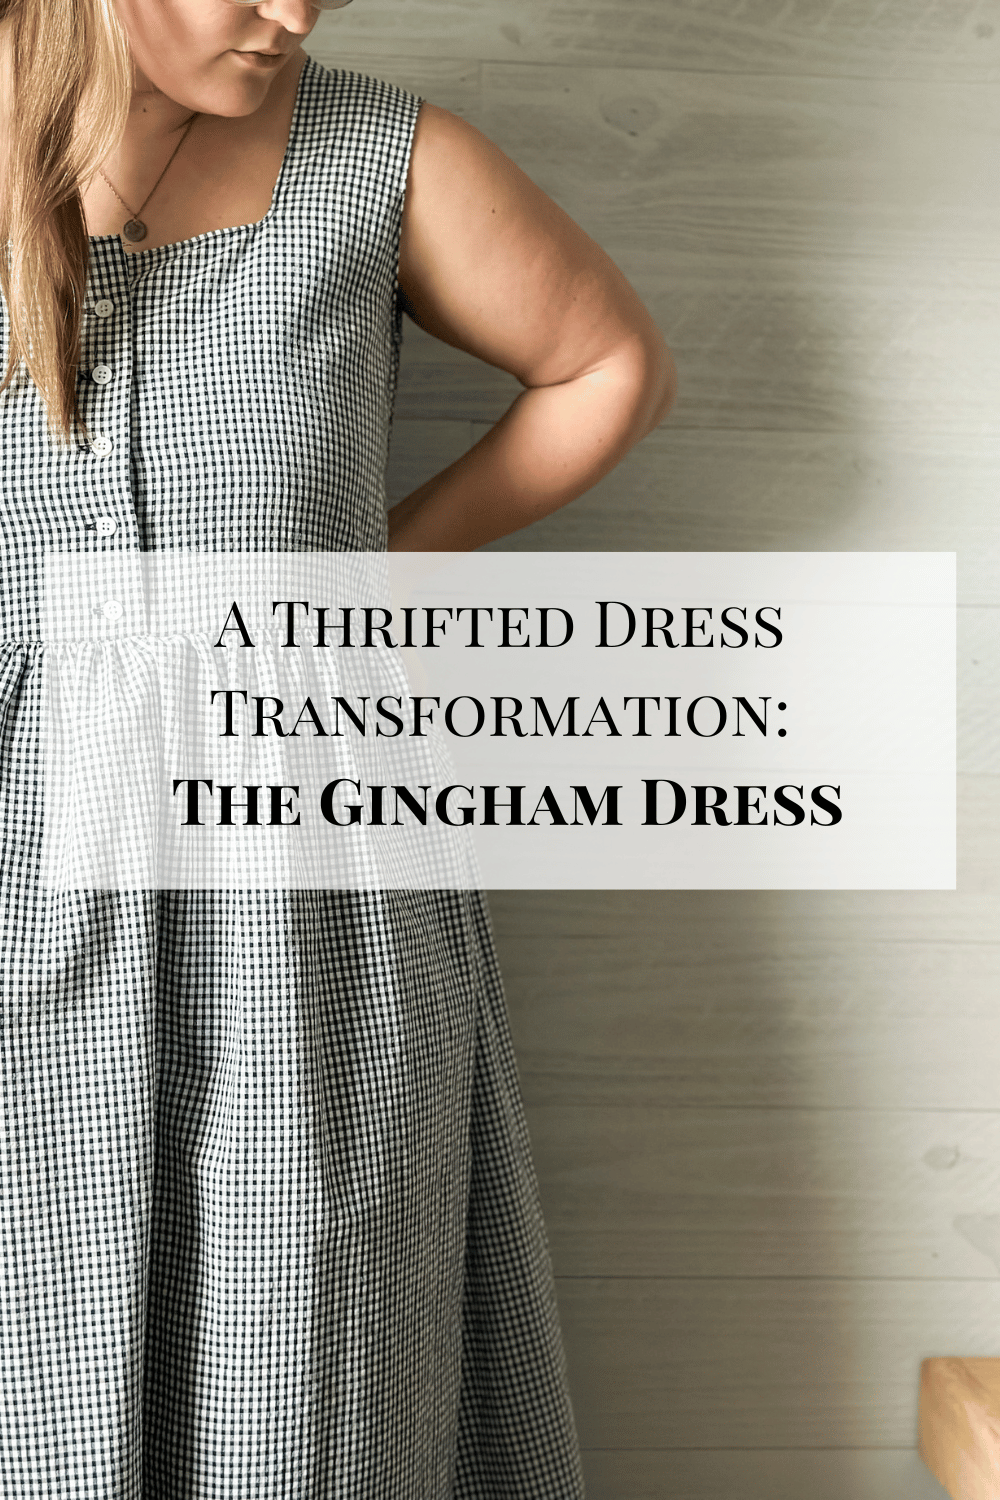 A thrifted dress transformation the Gingham dress